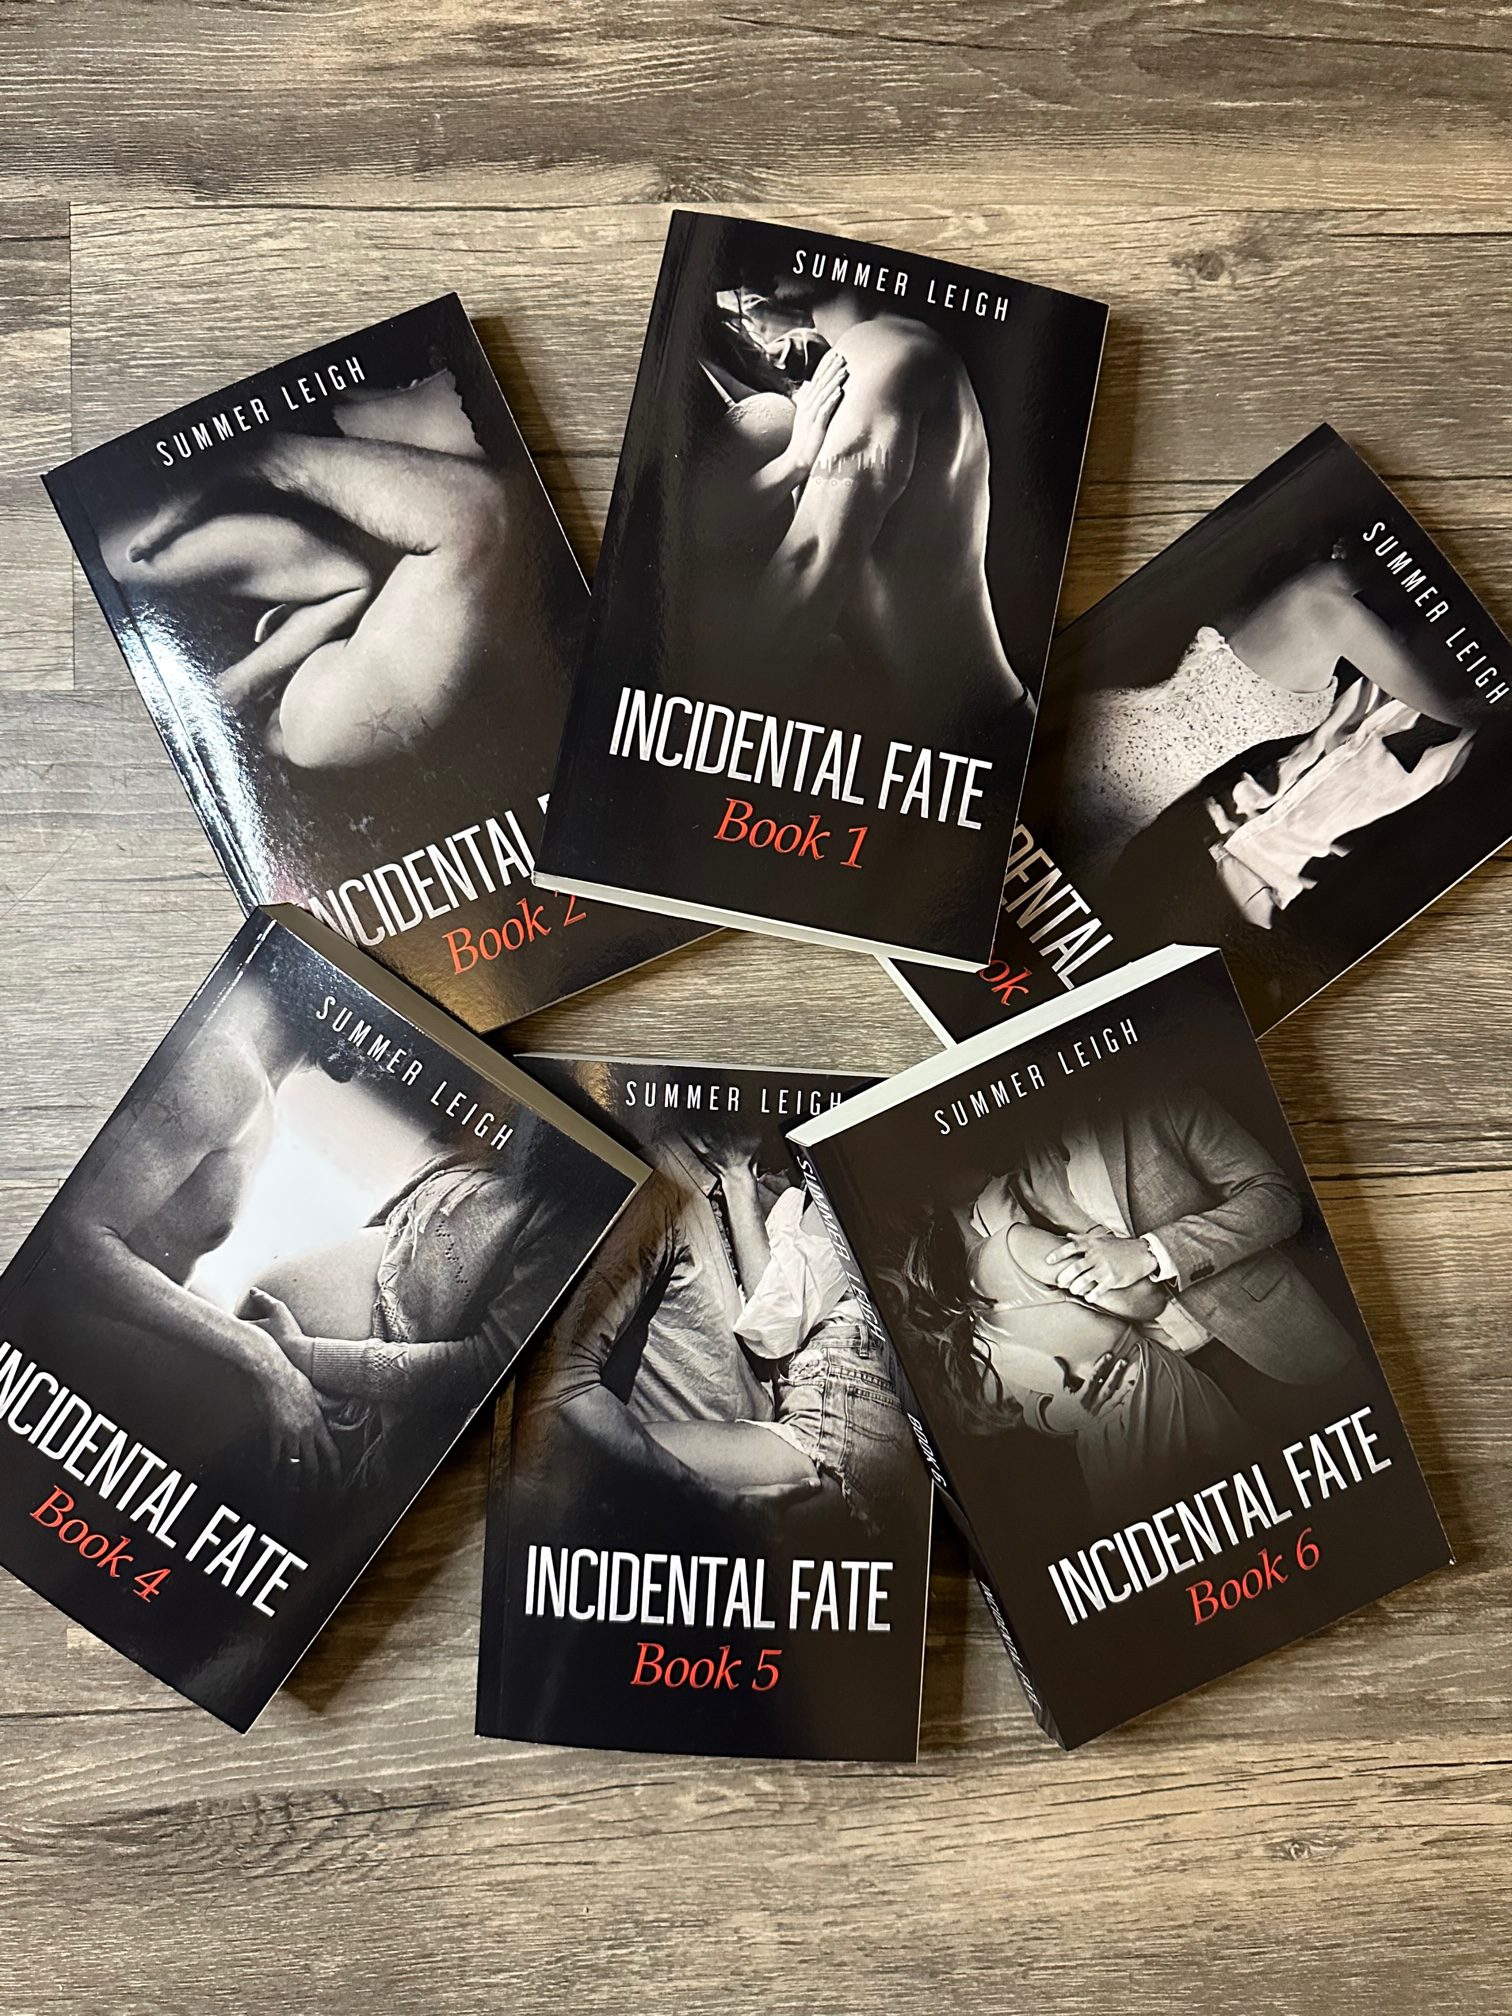 Incidental Fate Books by Summer Leigh